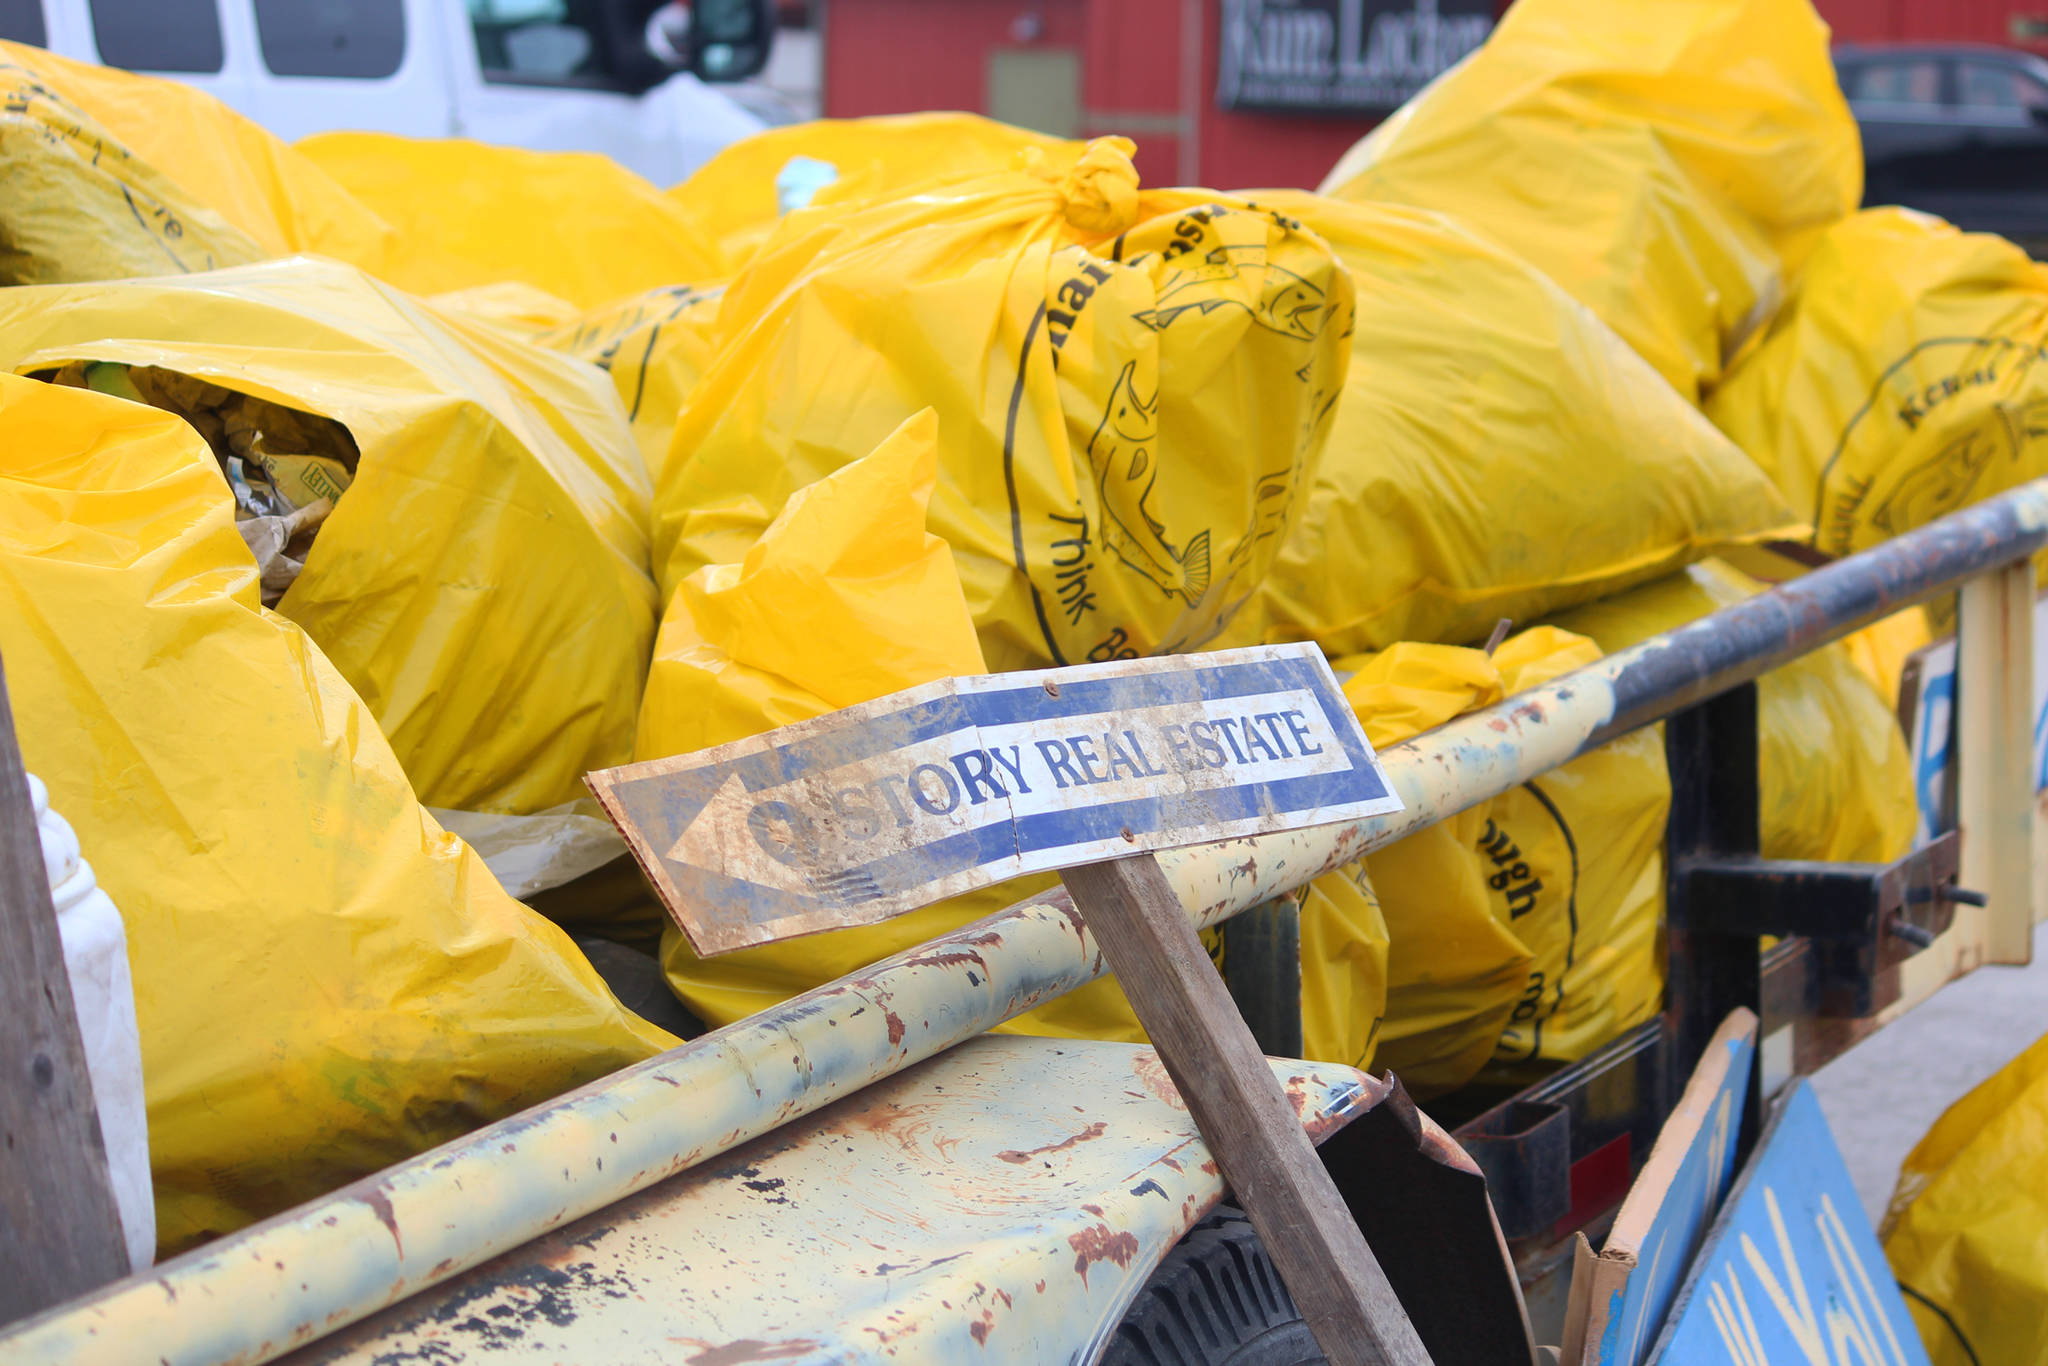 Bags of trash fill a trailer in the parking lot of the Homer Chamber of Commerce shortly after a clean-up effort Tuesday, April 17, 2018 in Homer, Alaska. Homer Wilderness Leaders is hosting a week of two-hour sessions to help clean up the town, which will culminate in a celebration at Alice’s Champagne Palace on Saturday. (Photo by Megan Pacer/Homer News)